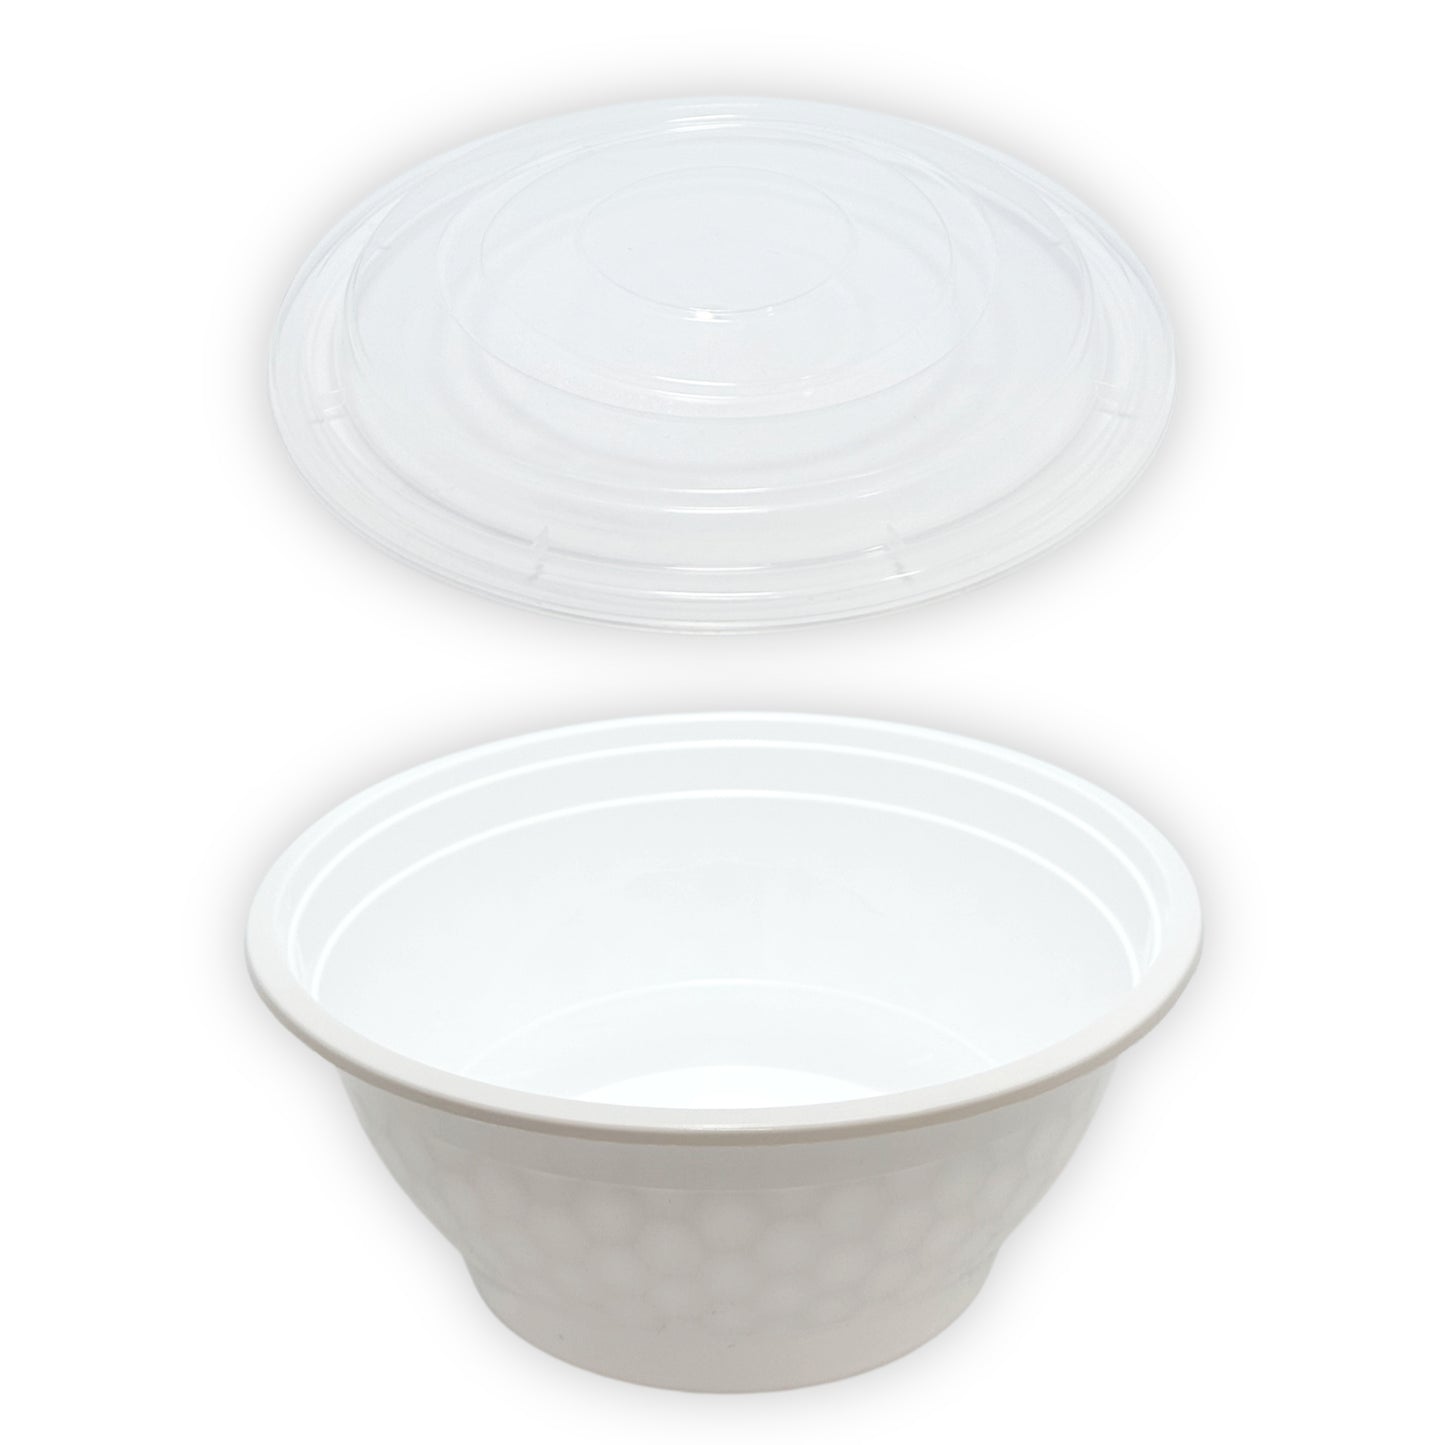 KIS-BO32G | 150sets 32oz, 946ml White PP Round Bowl with Clear Lids Combo; $0.246/set